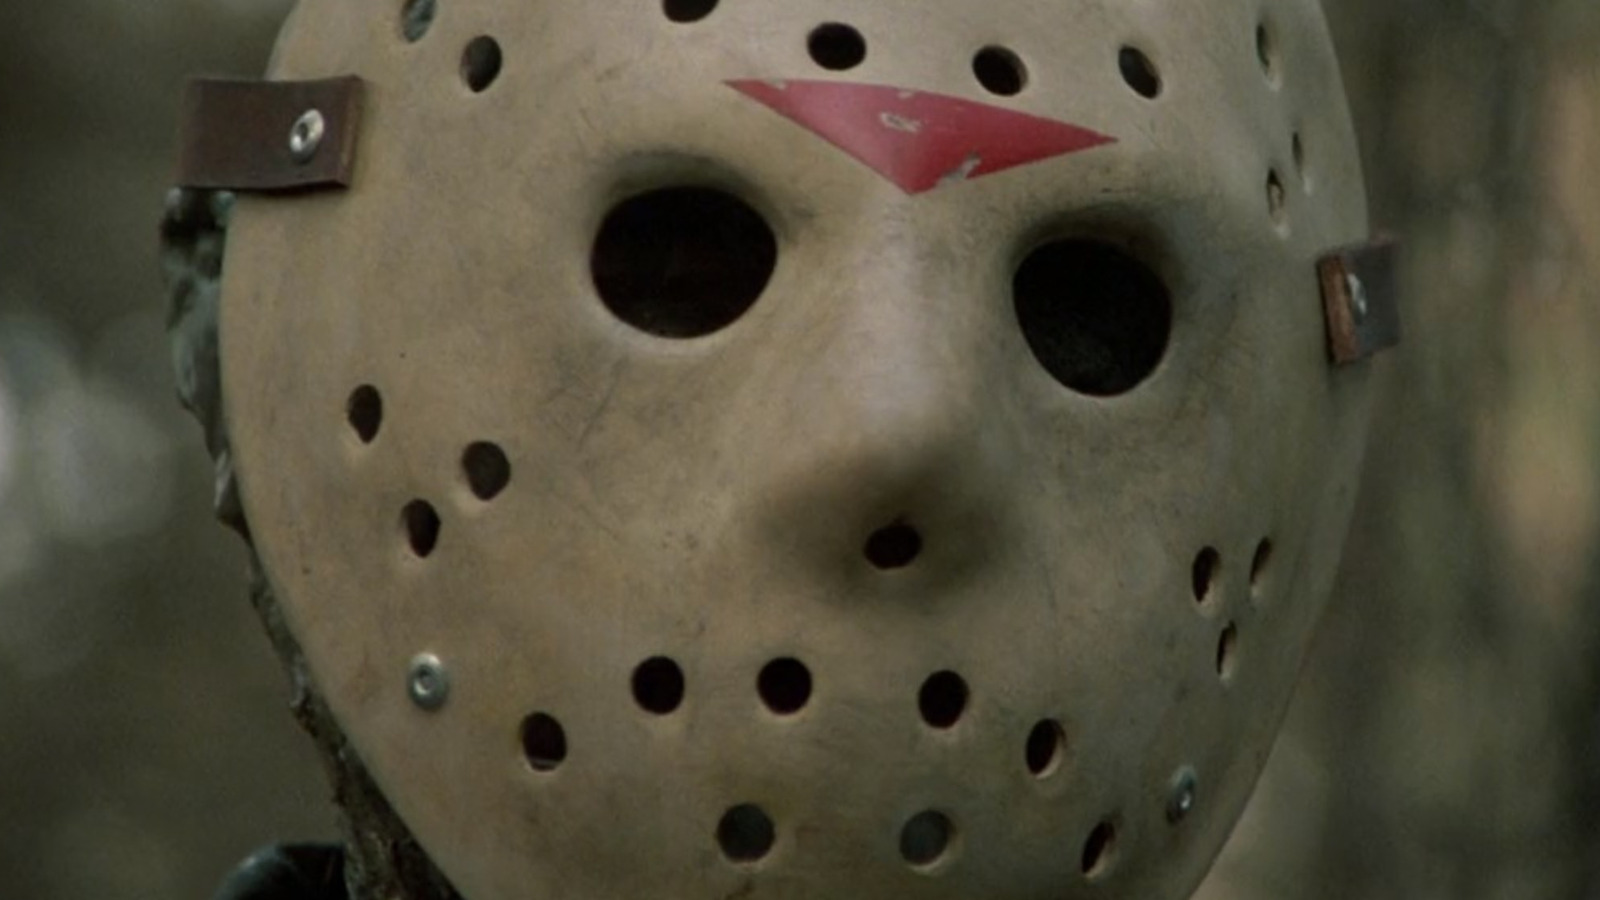 Friday the 13th Part III (Film) - TV Tropes